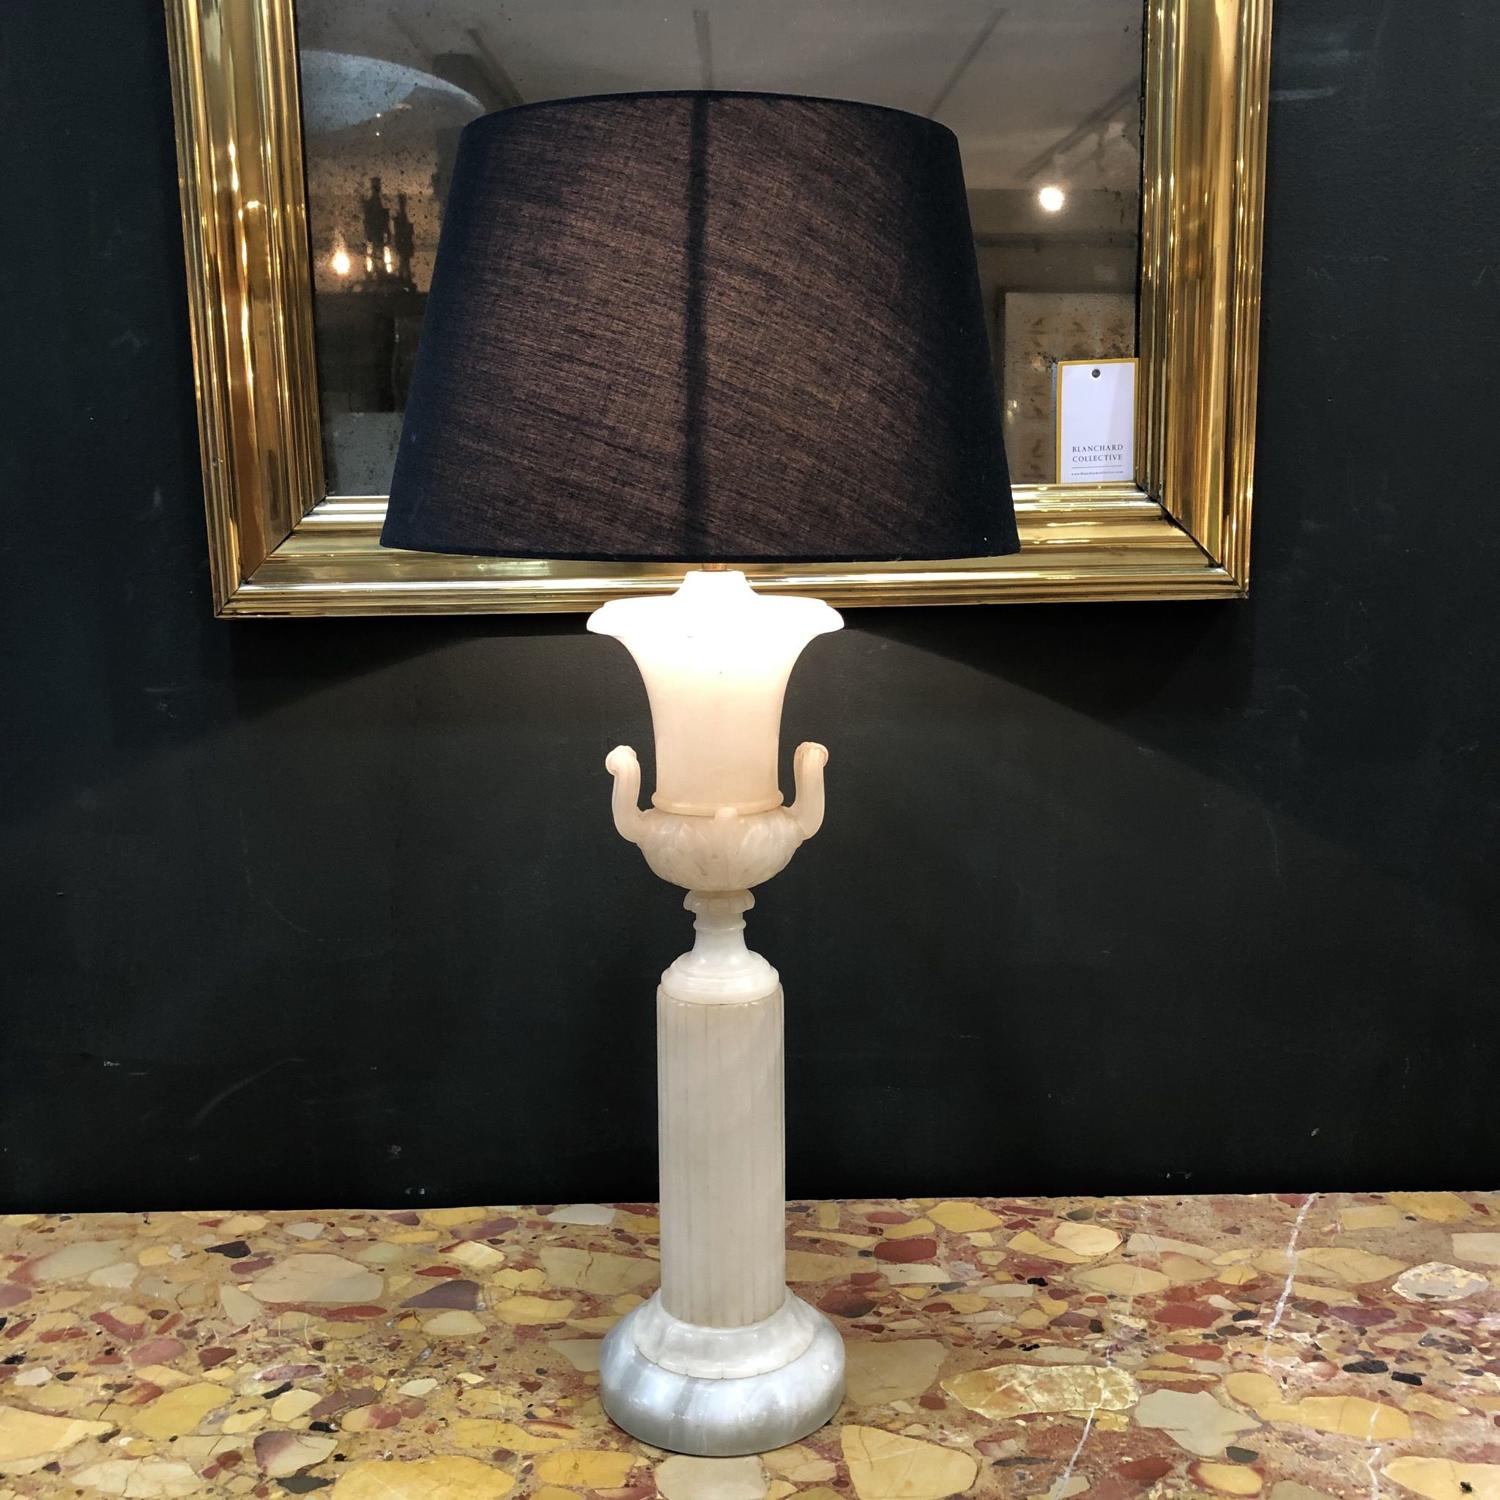 An Alabaster table lamp